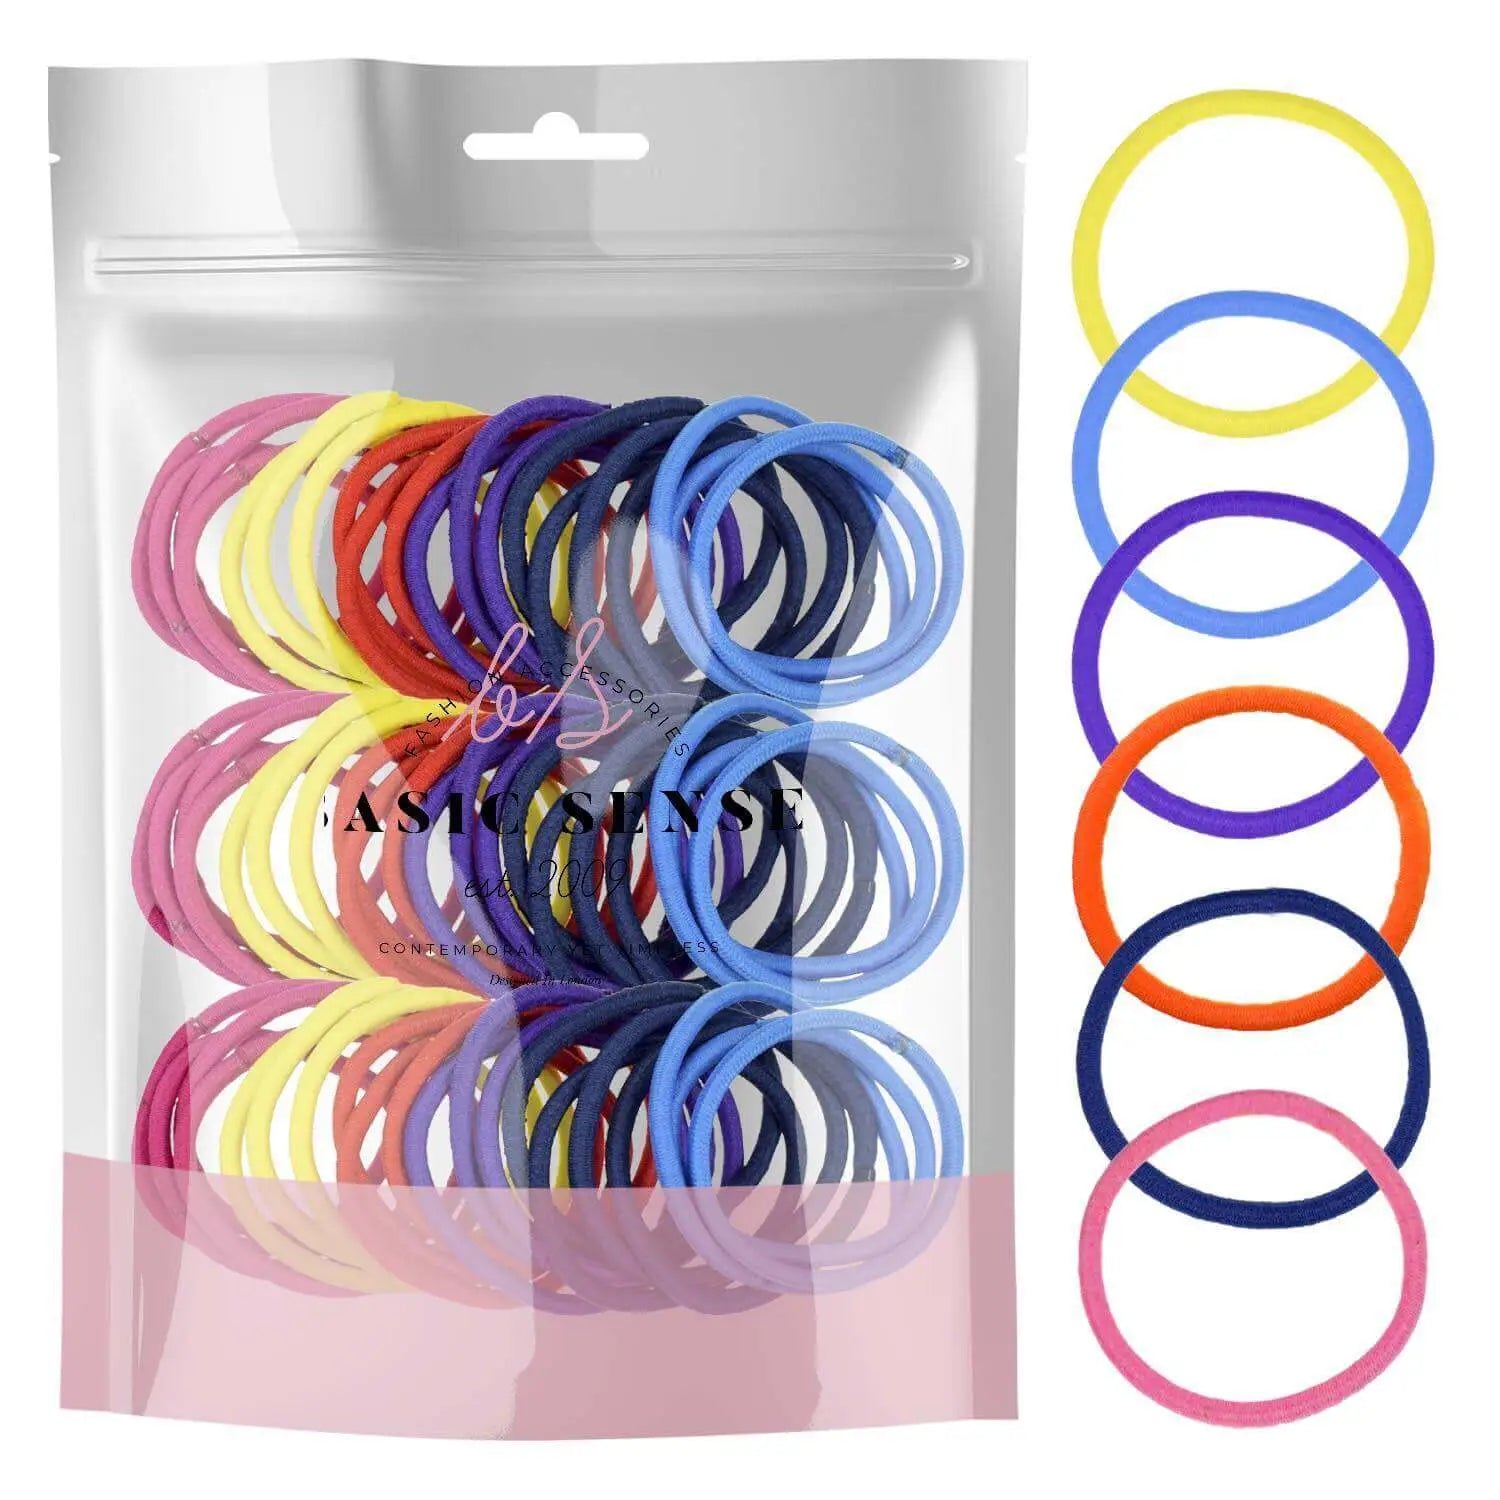 Assorted color hair ties in 3mm soft elastic, 60 pieces